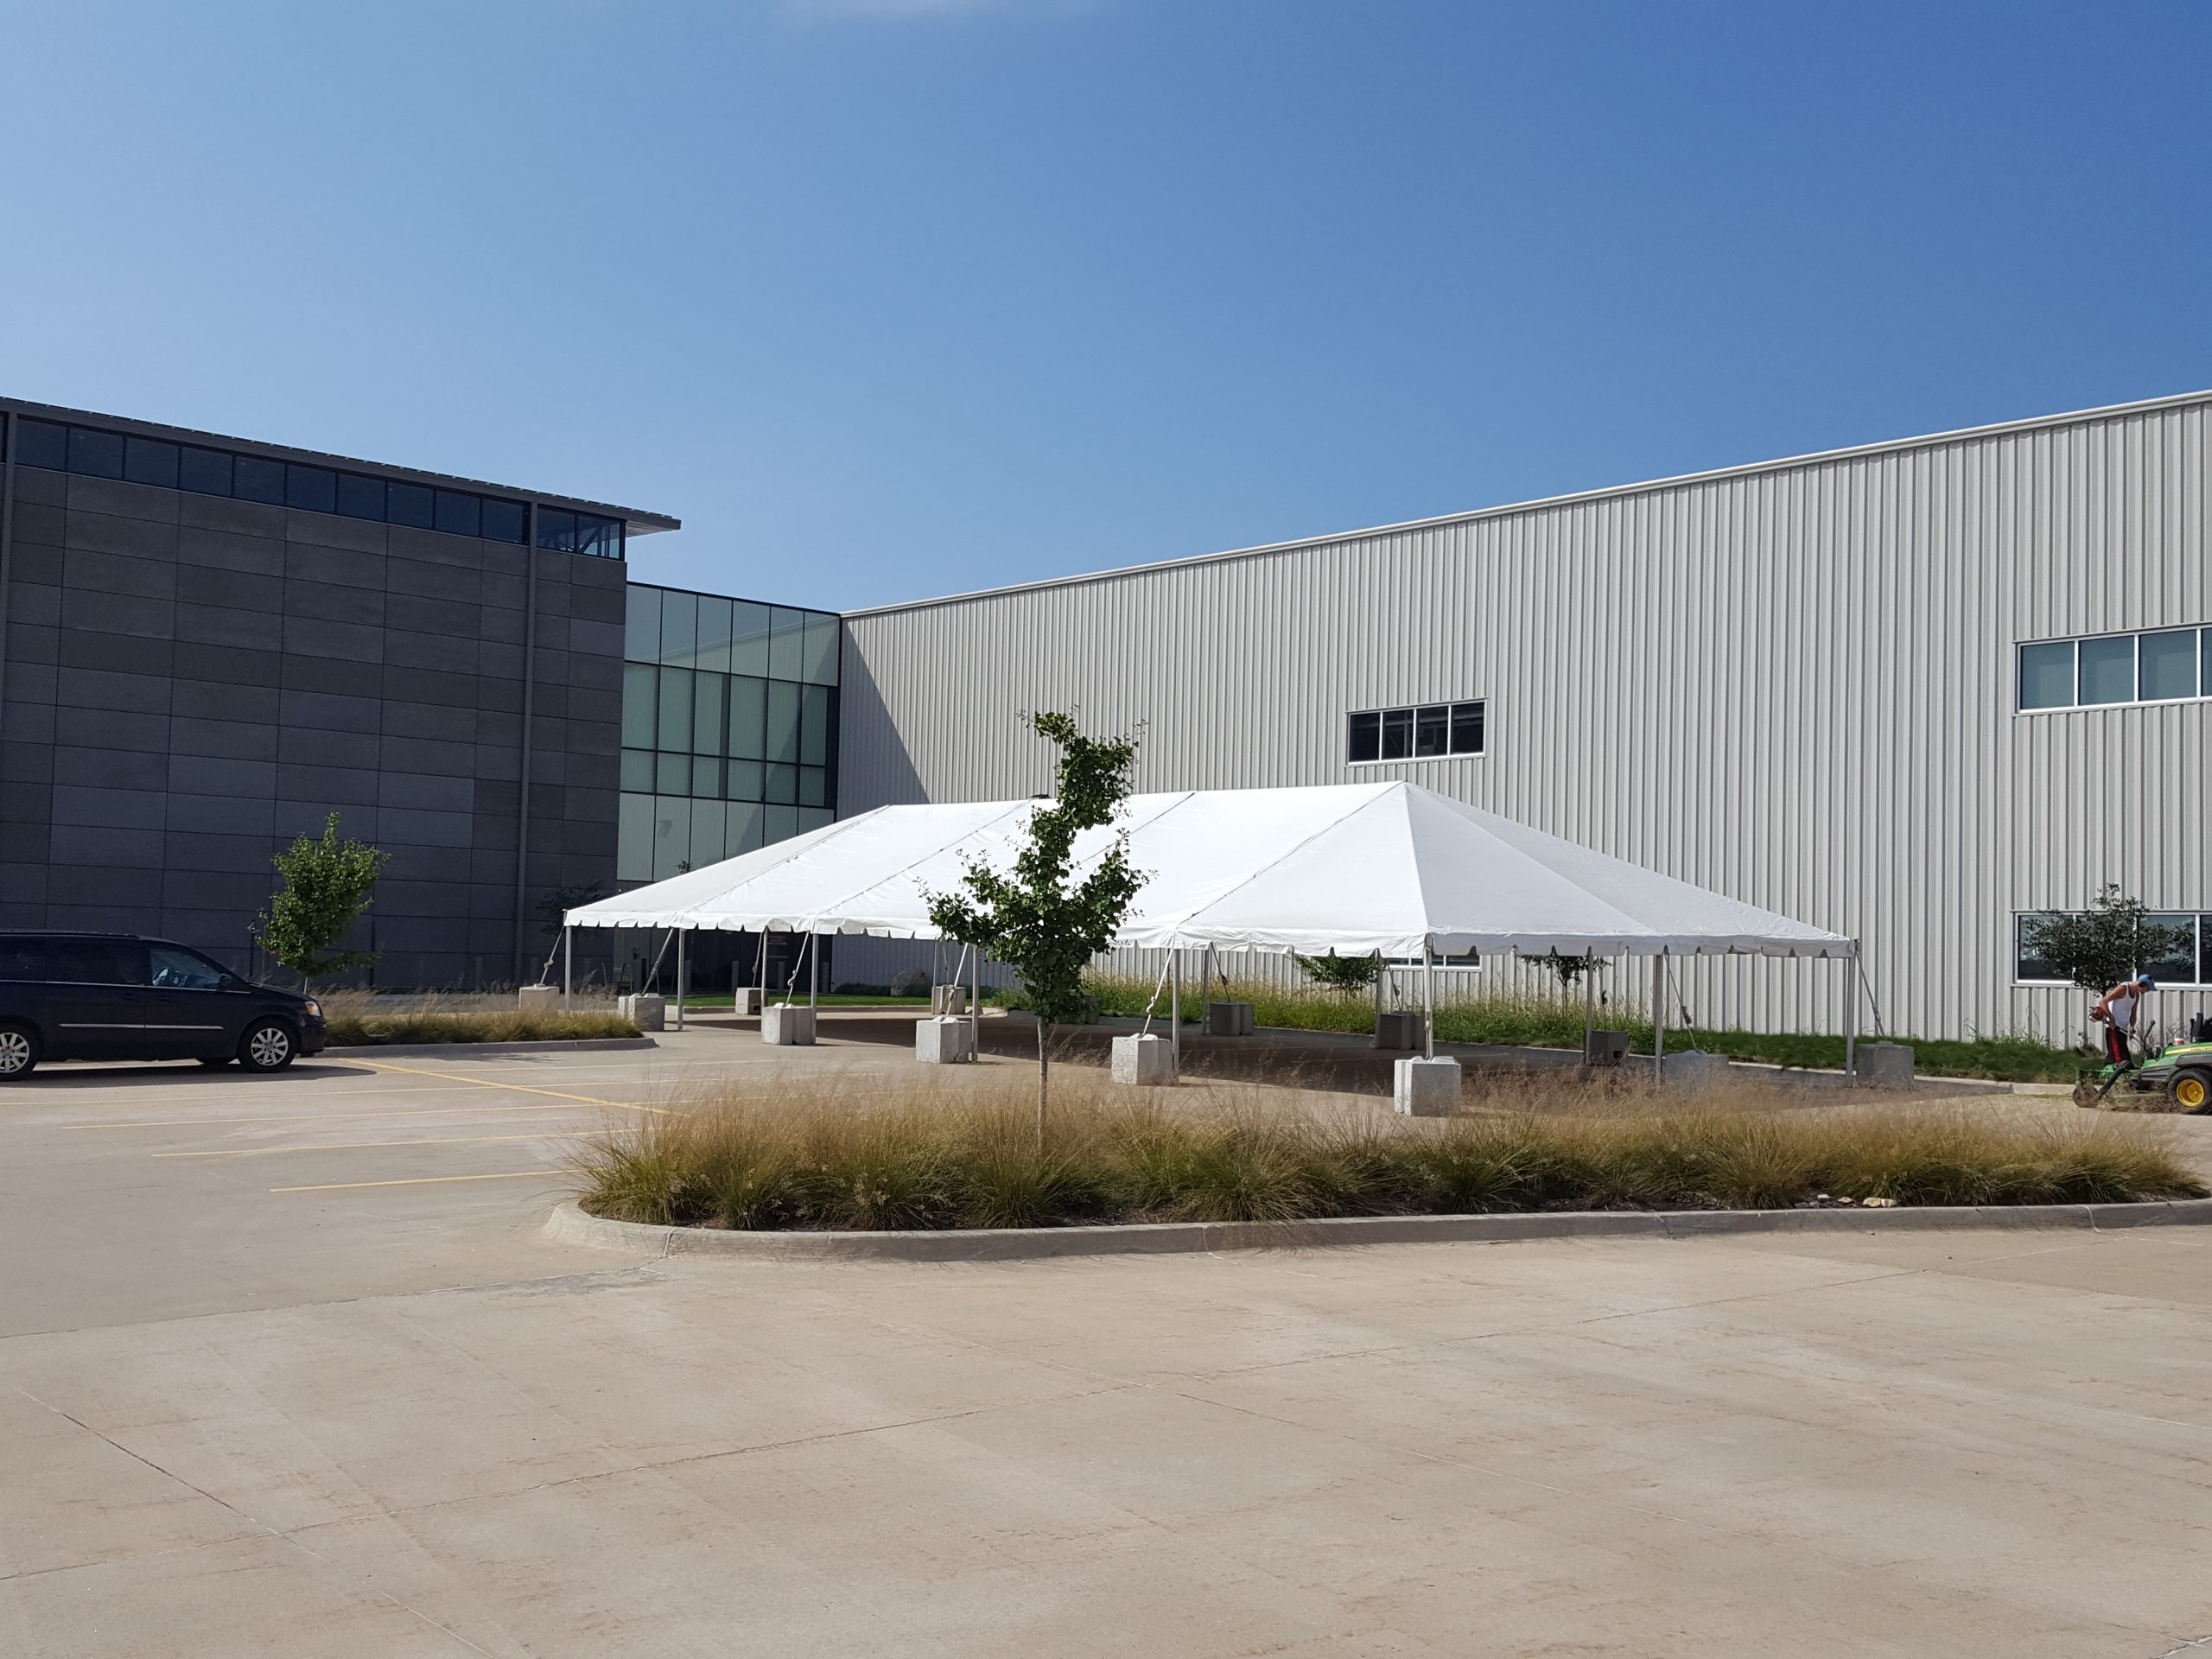 30' x 75' frame tent at Brownells in Grinnell, Iowa